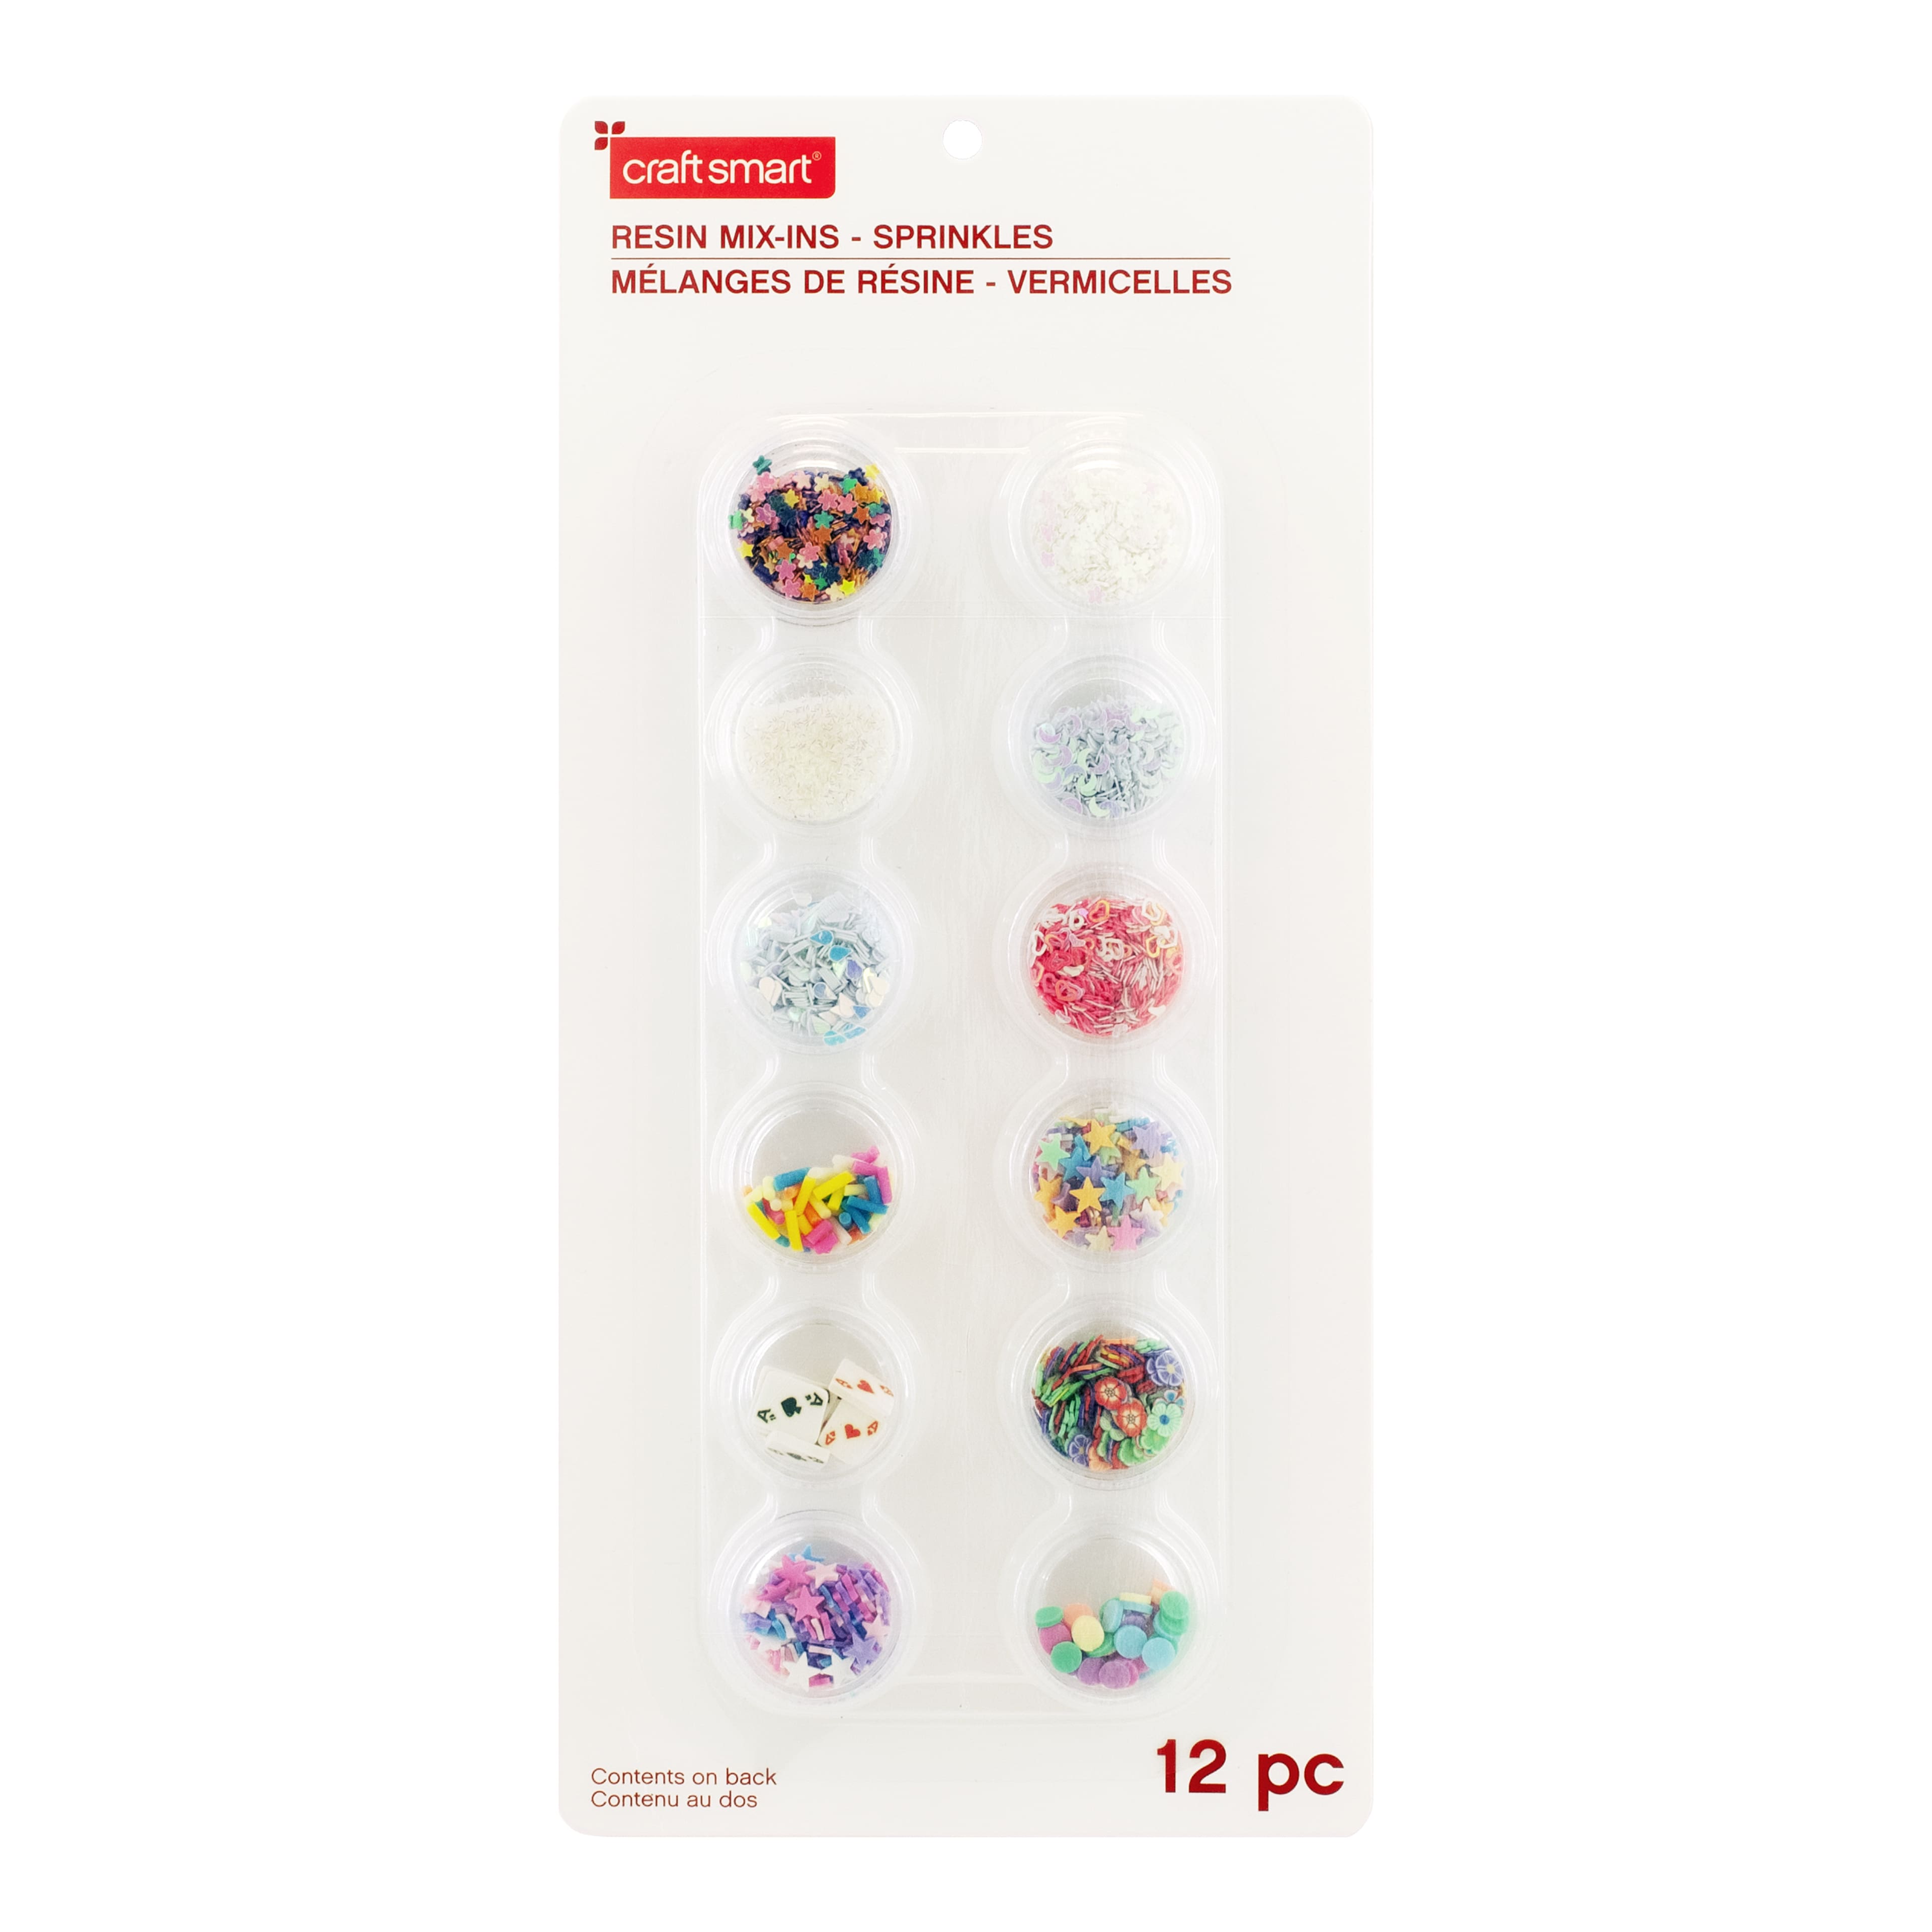 Sprinkles Resin Mix-Ins by Craft Smart®, 12 ct. 